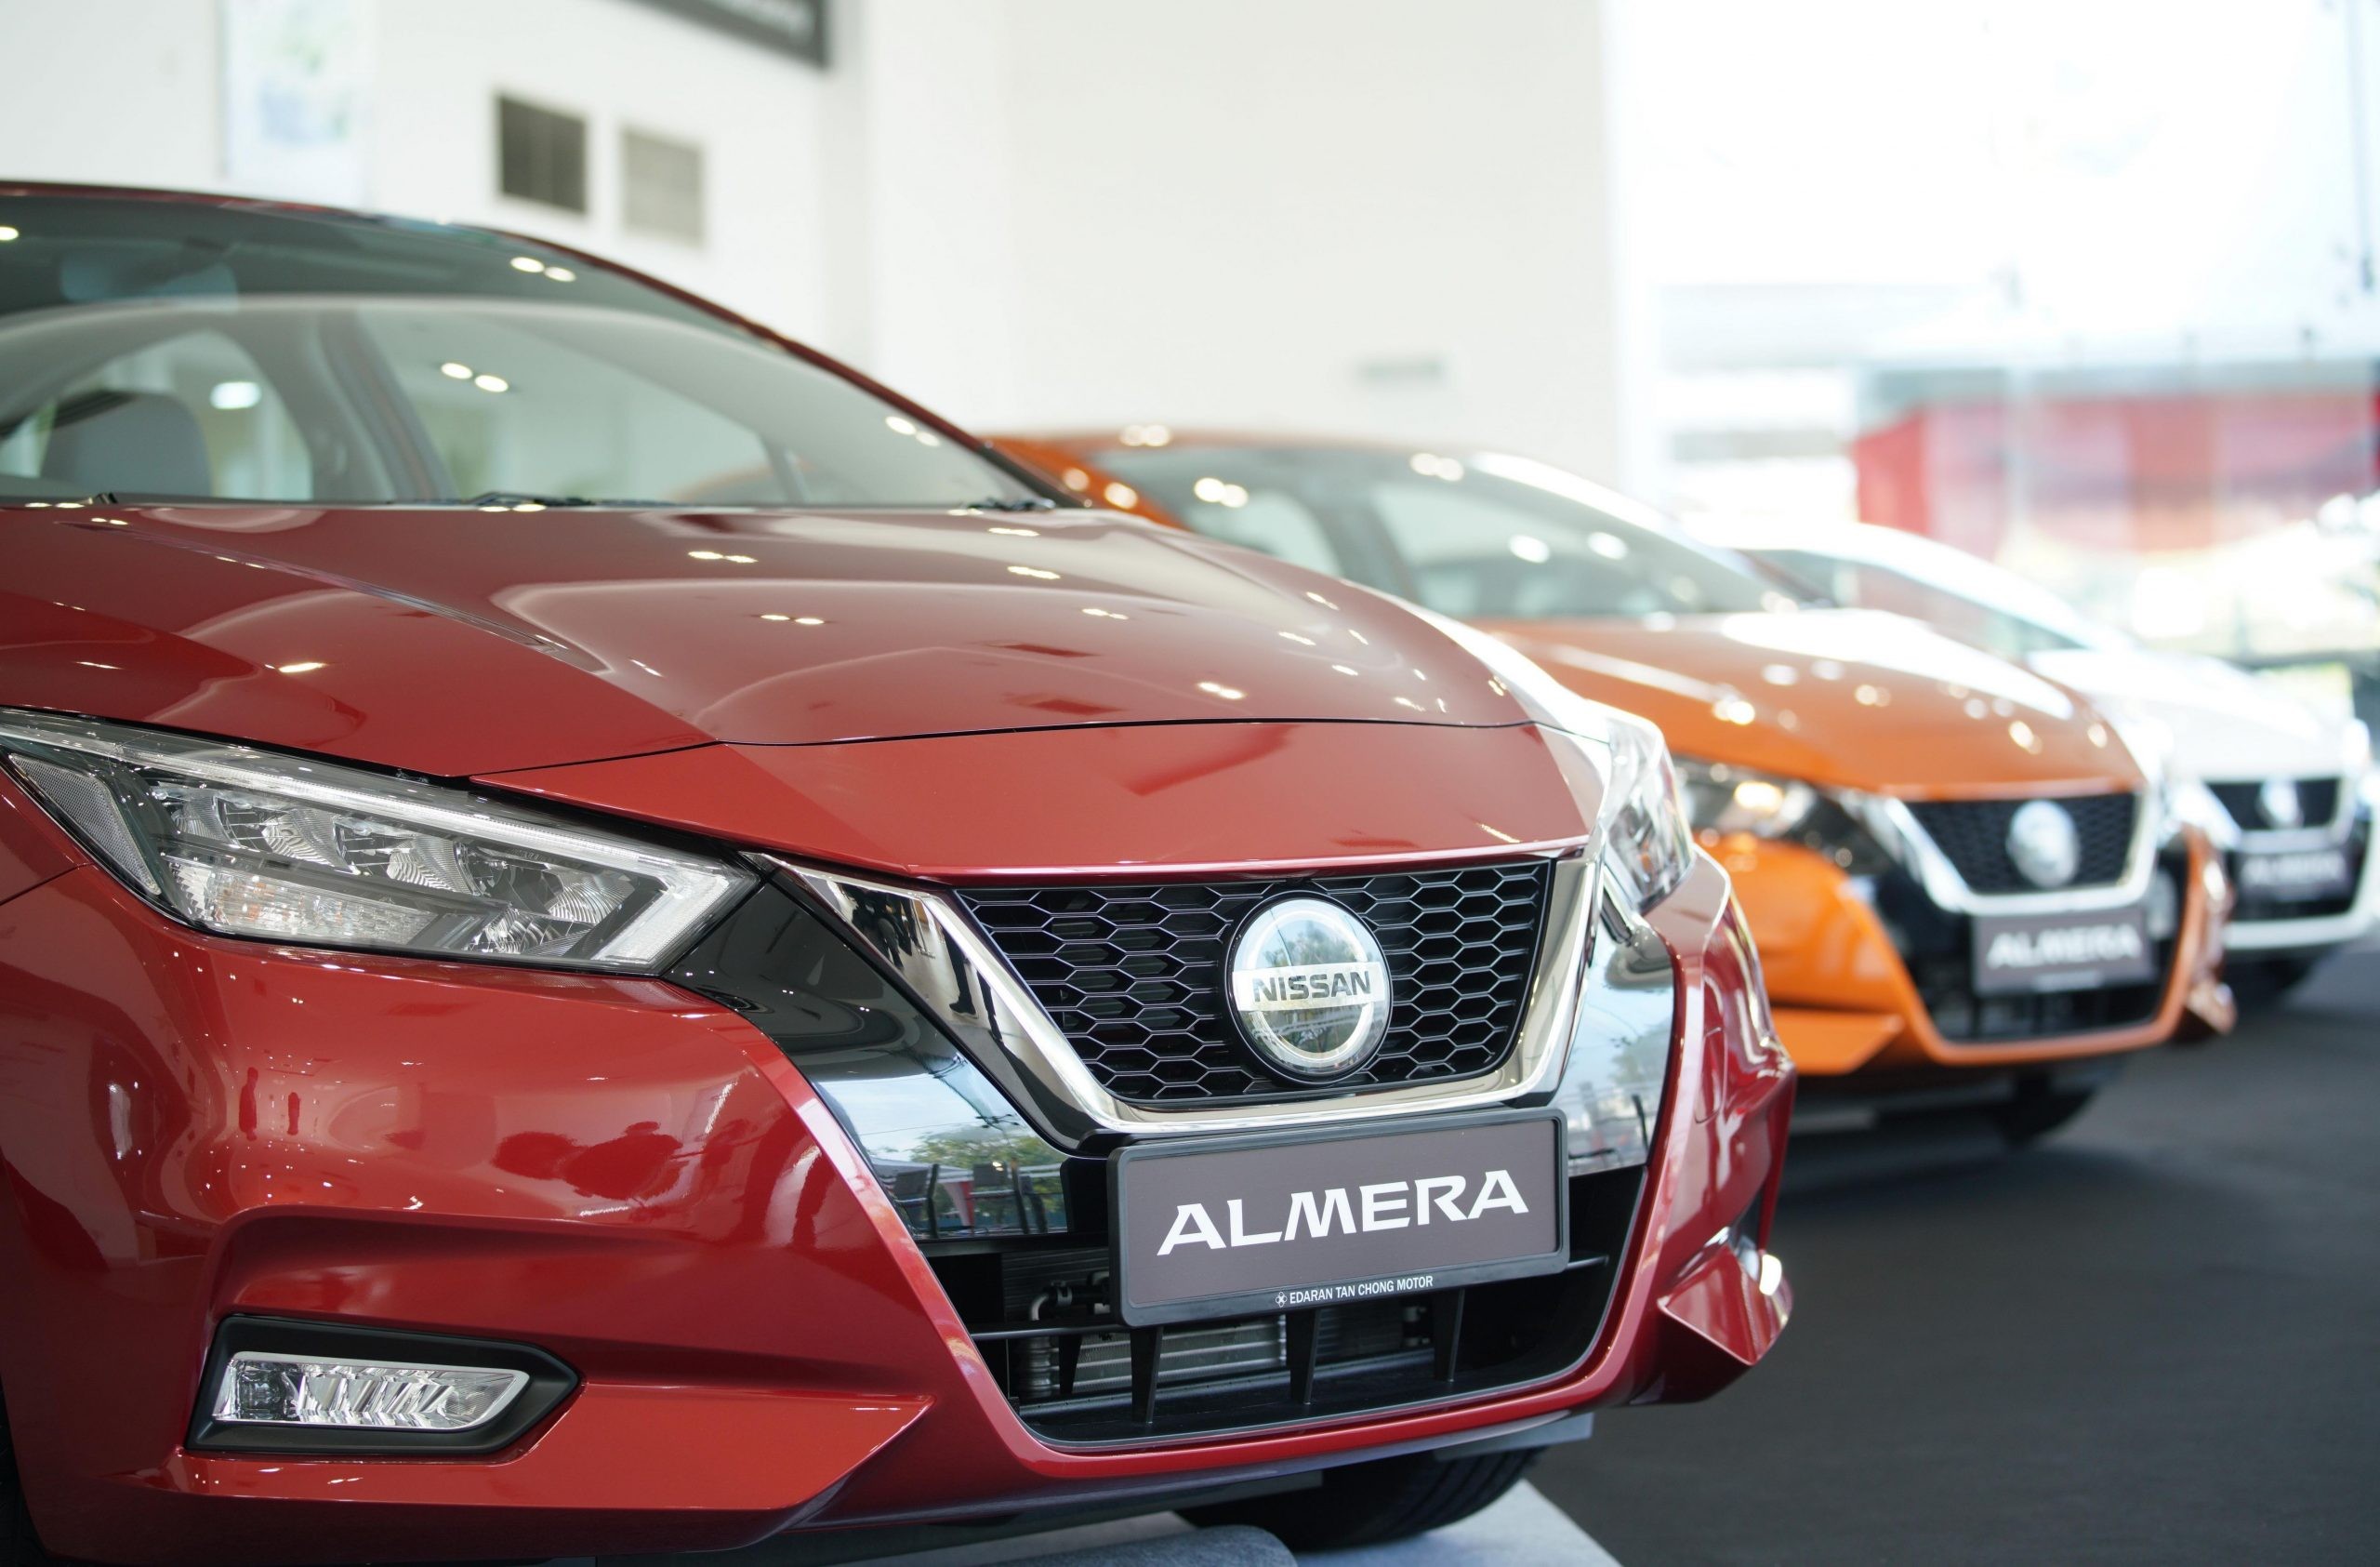 Where is the Engine Number Located In the Nissan Almera Nissan Almera Turbo Tech Specs are Impressive Automacha Of Where is the Engine Number Located In the Nissan Almera